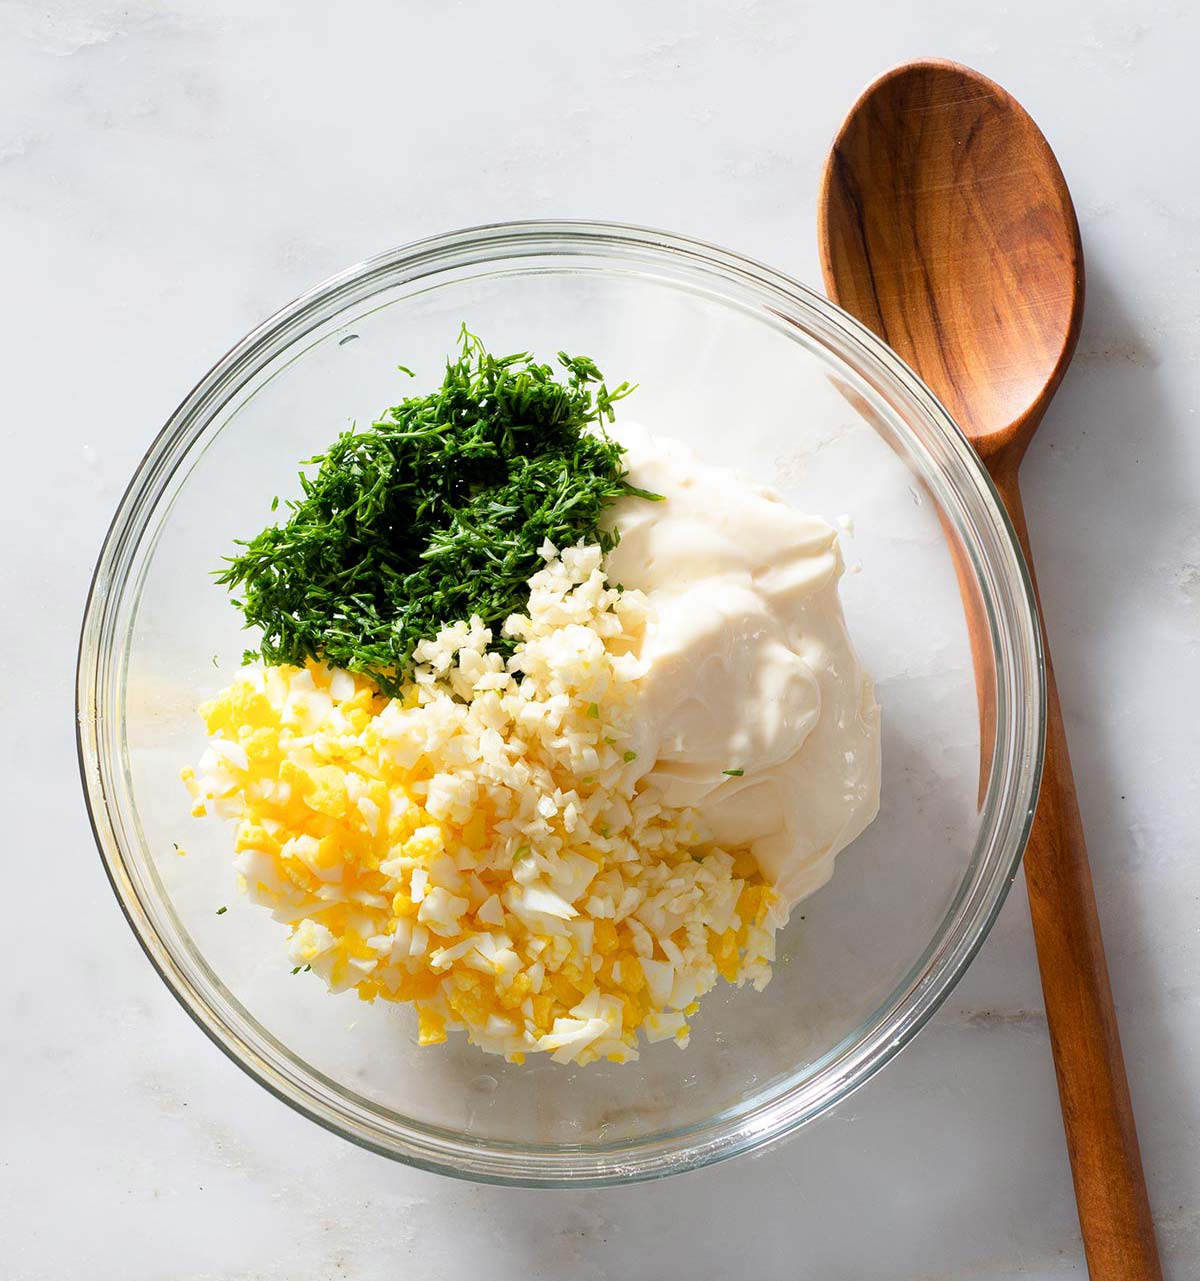 Dill aioli ingredients in a bowl and a wooden spoon.